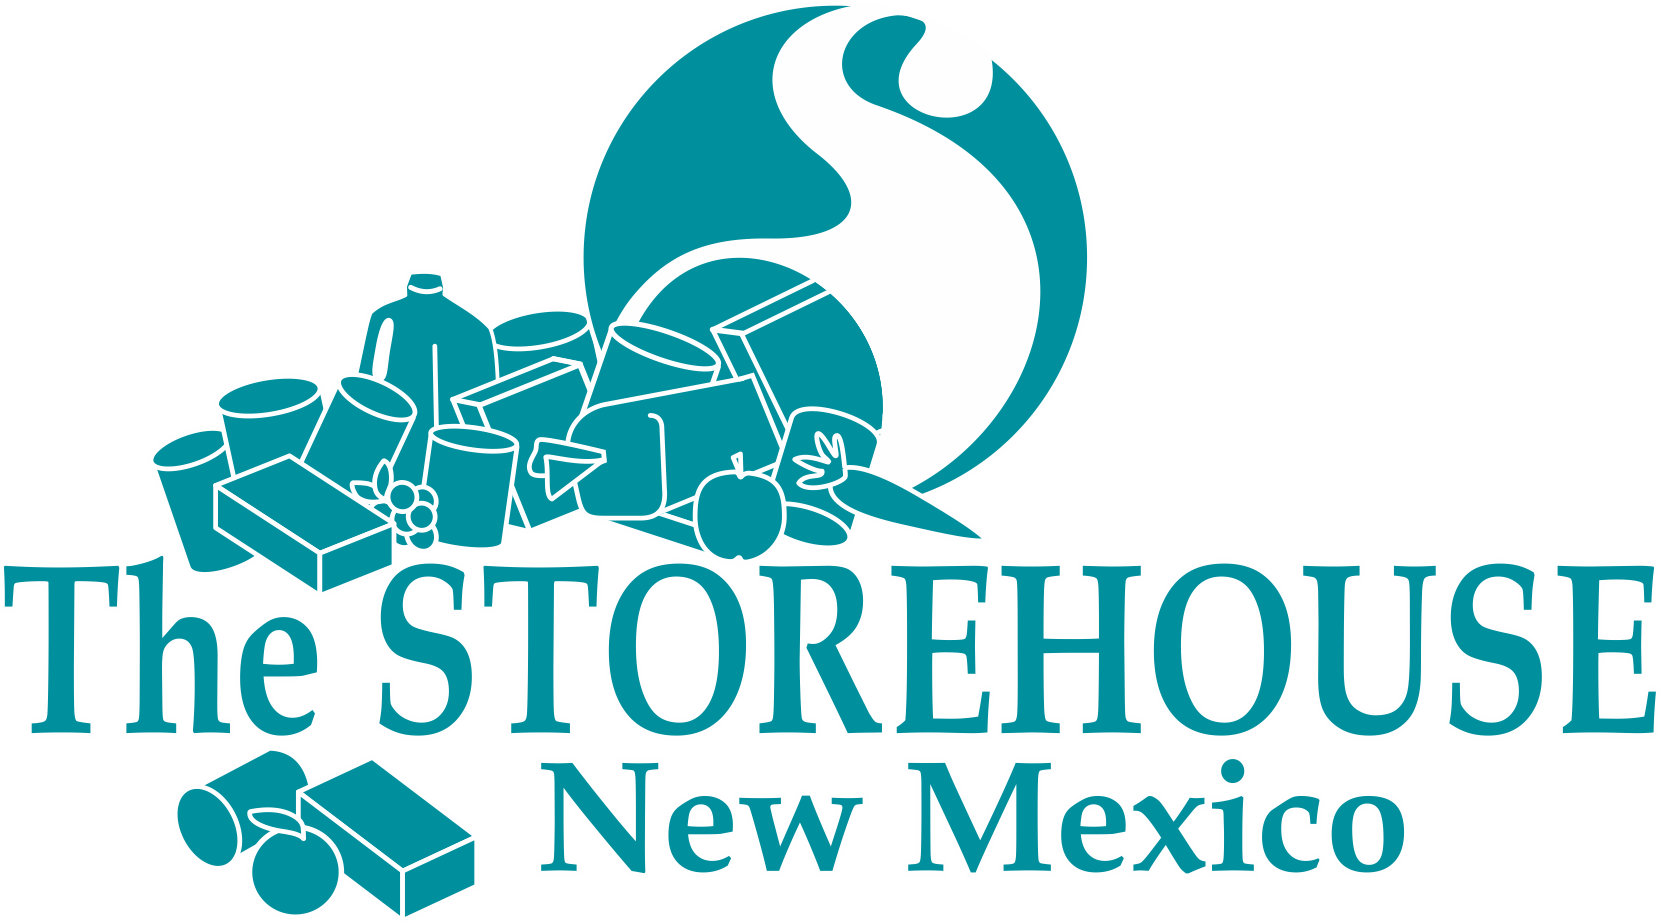 The Storehouse of New Mexico